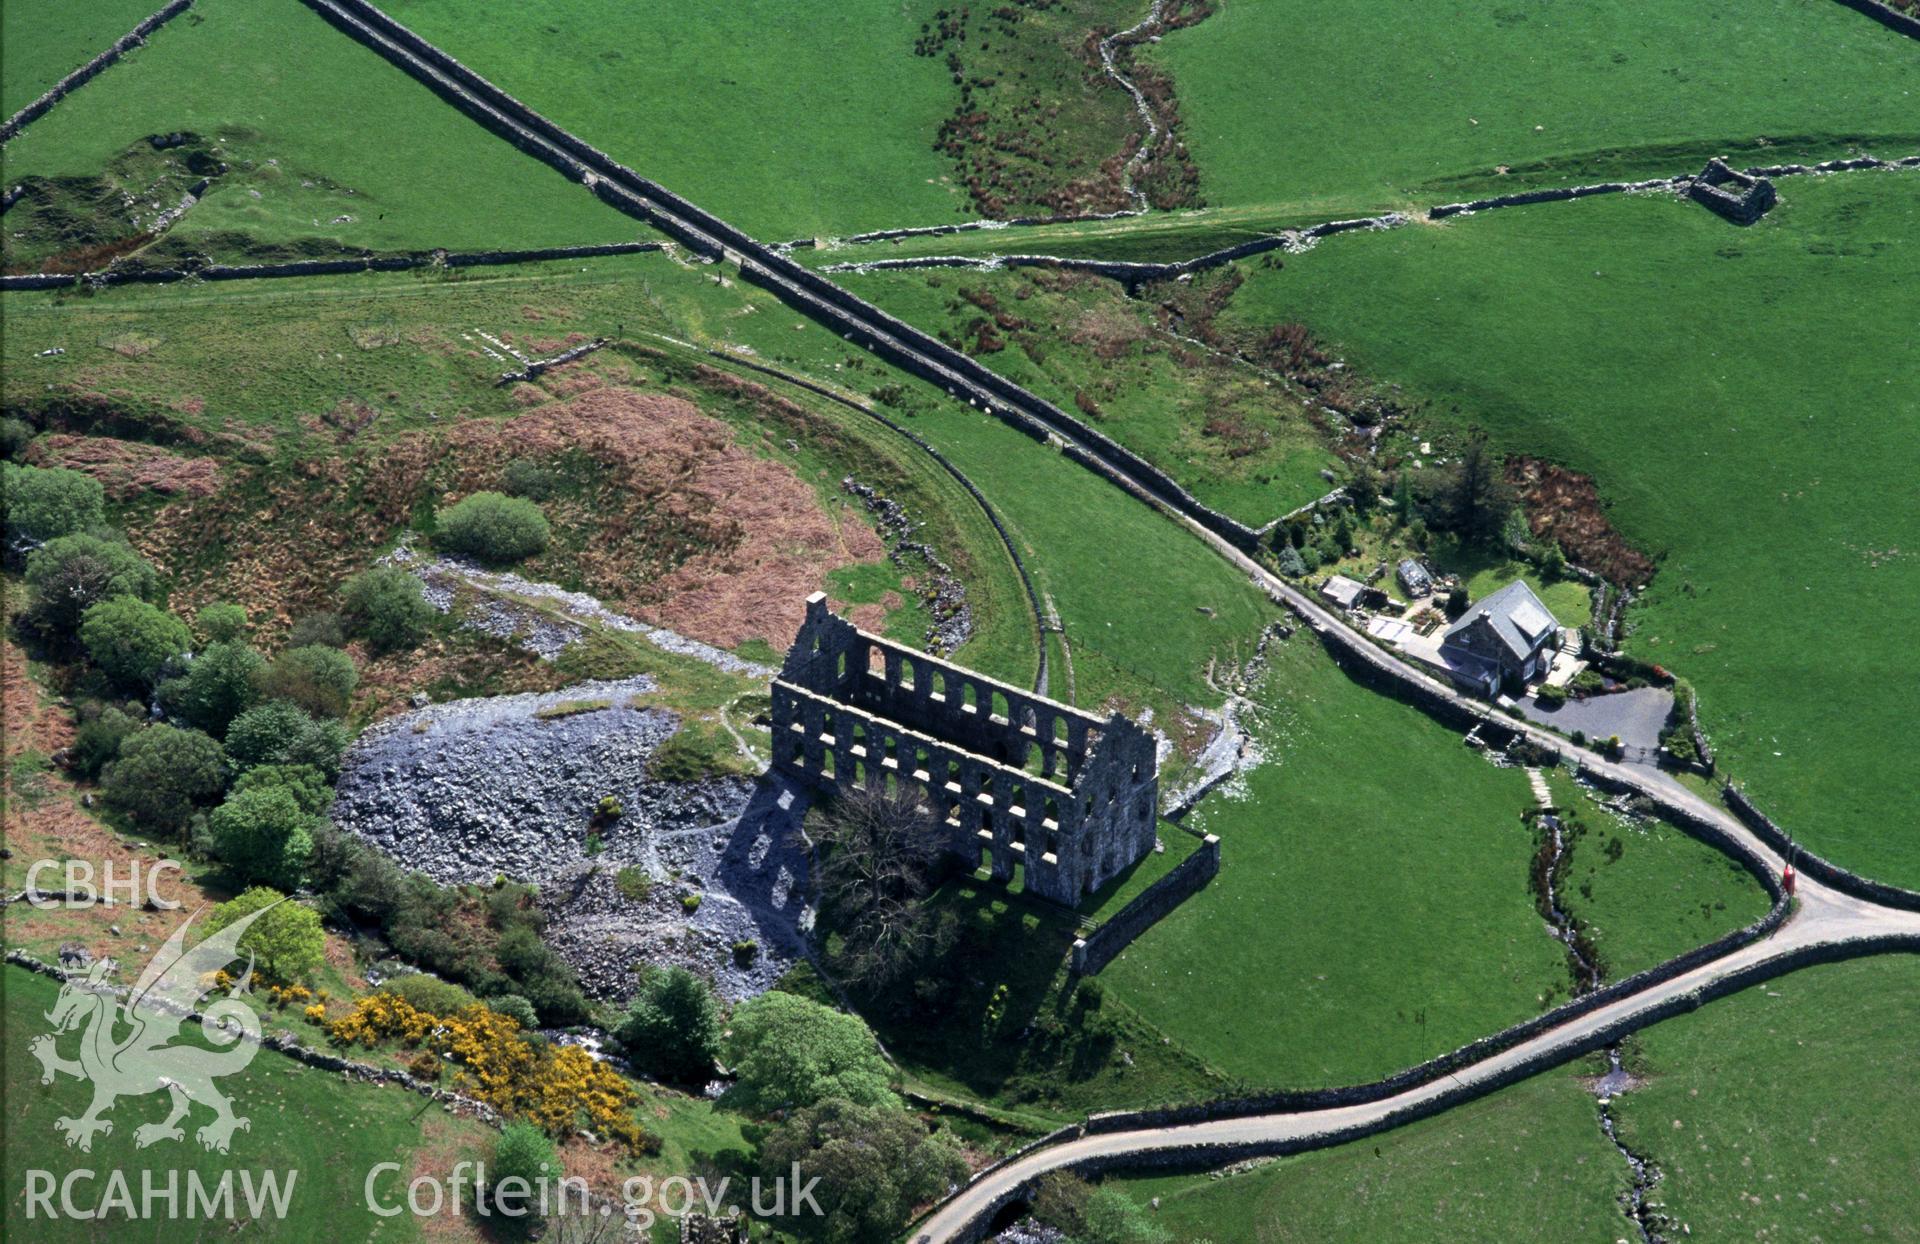 Slide of RCAHMW colour oblique aerial photograph of Ynys-y-pandy Slate Mill, taken by C.R. Musson, 4/5/1993.